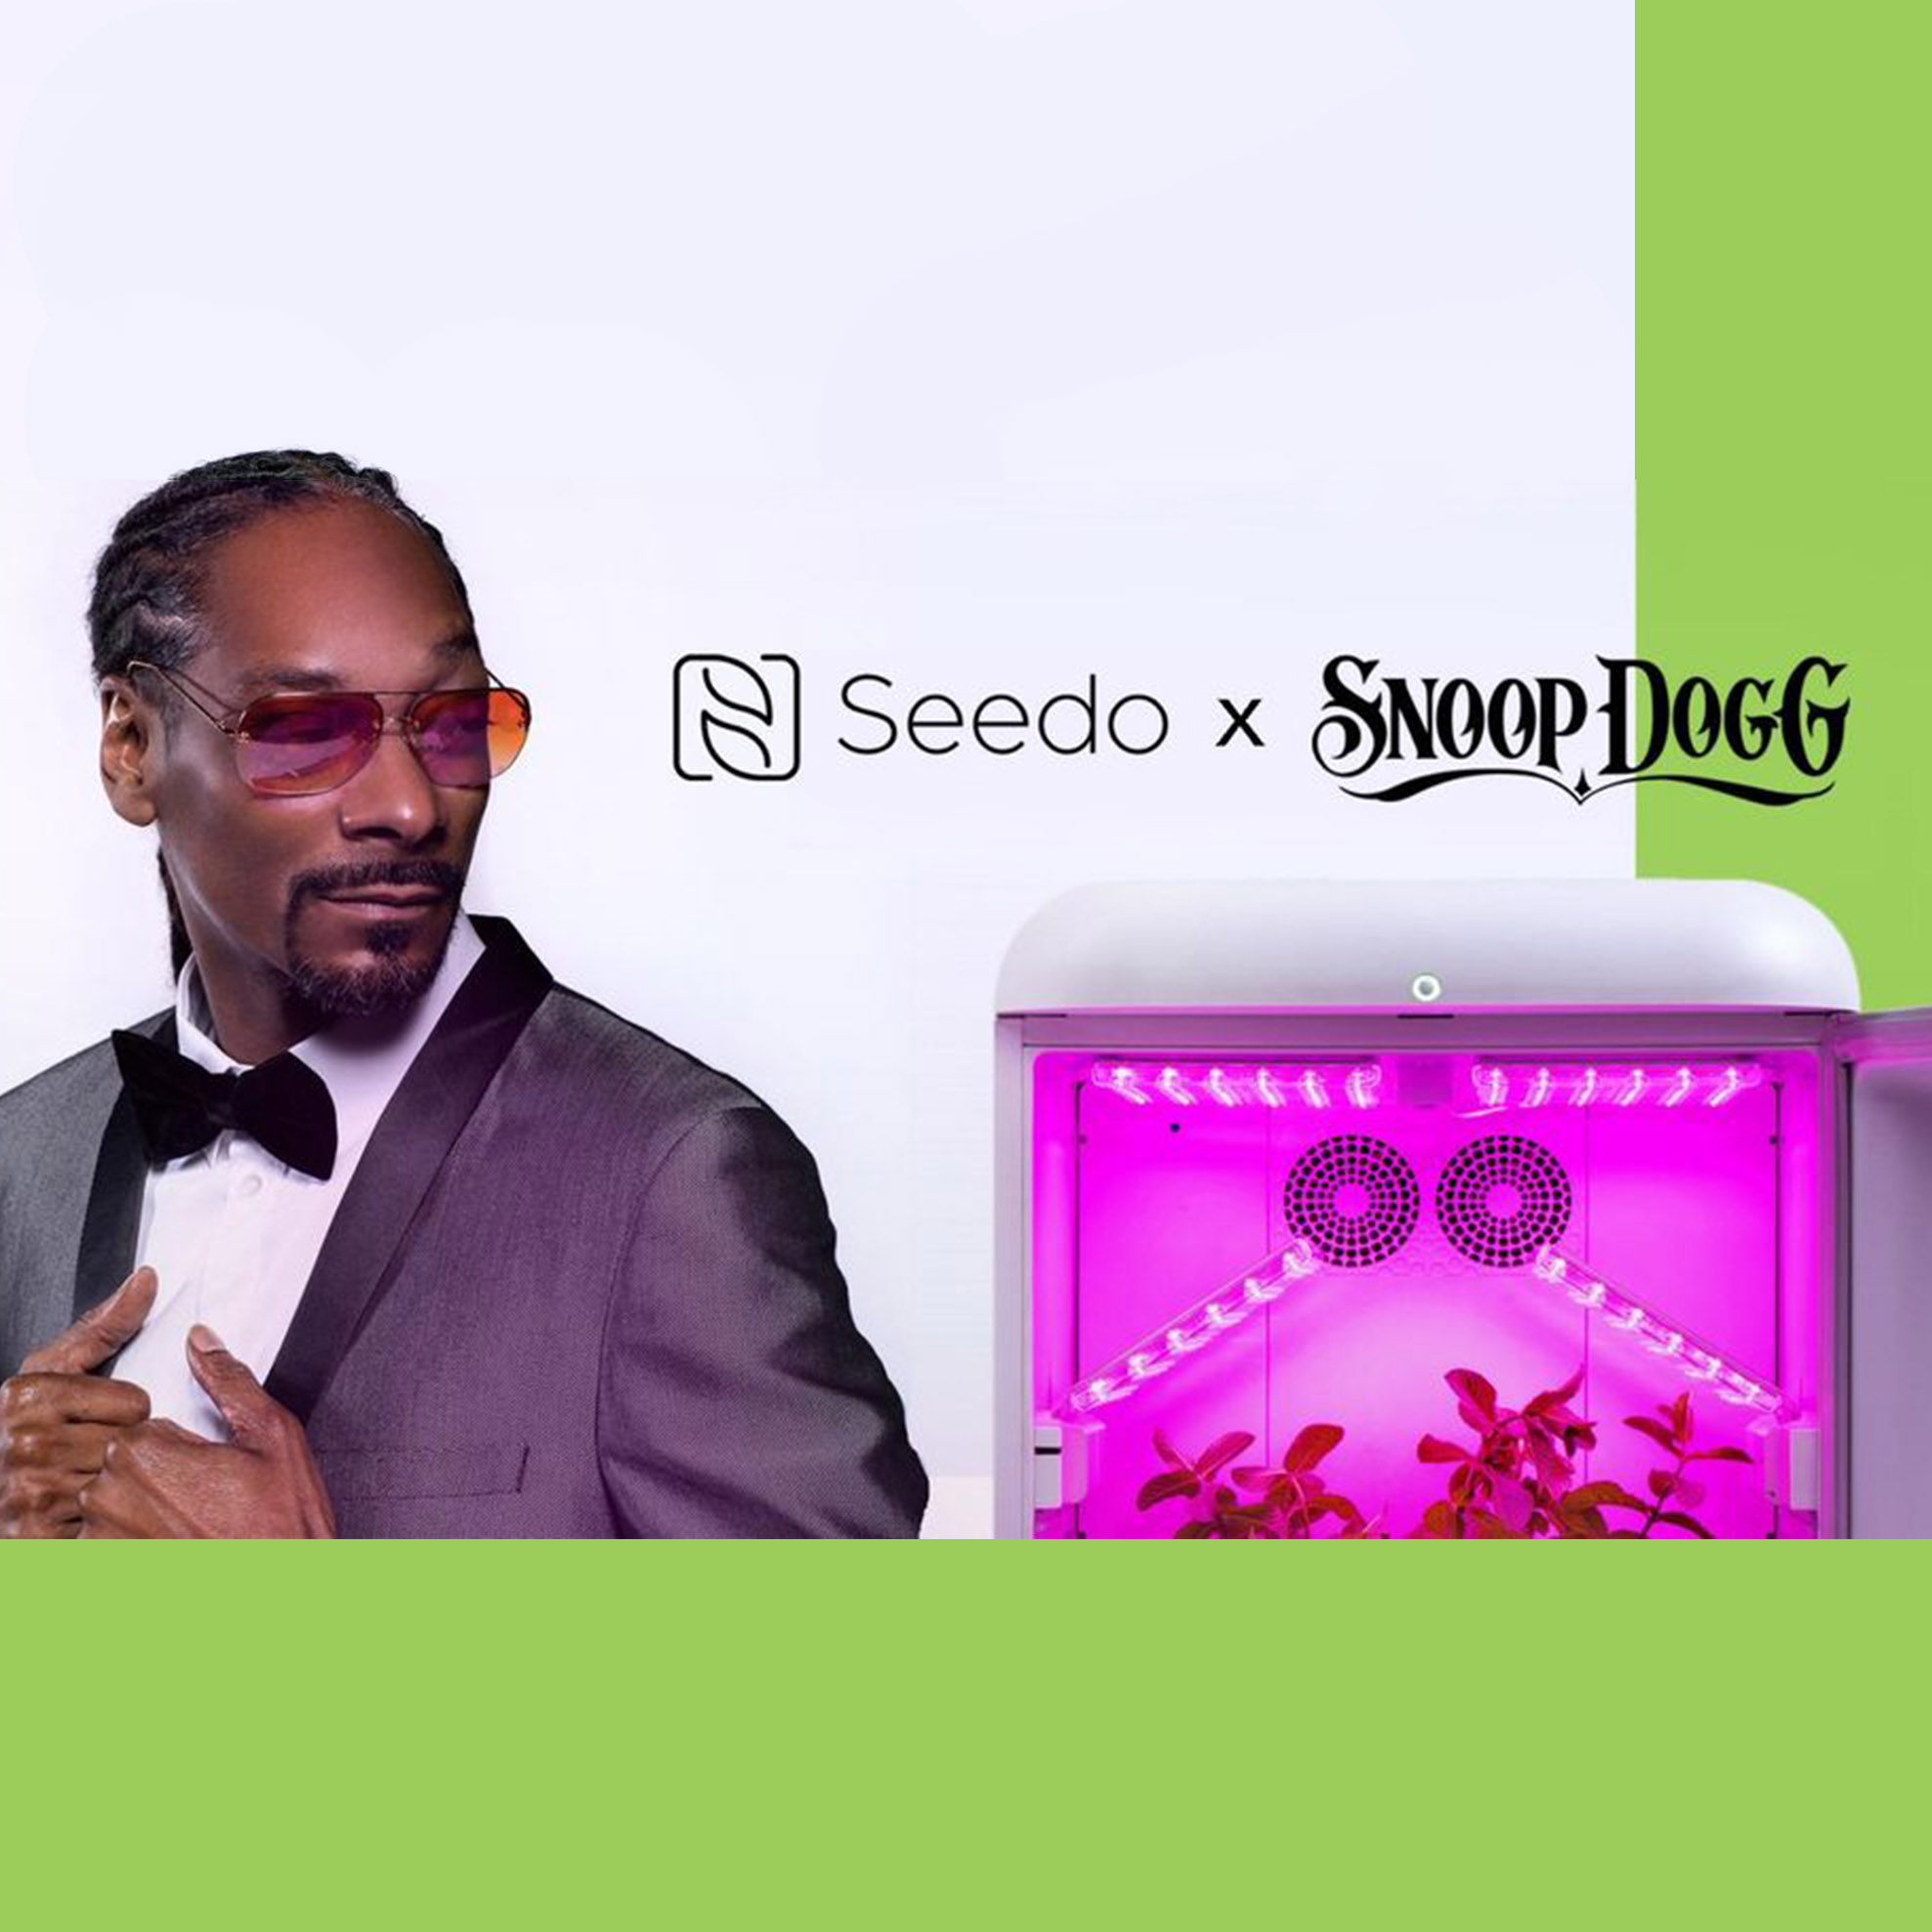 Snoop Dogg and Seedo Want You to Grow Your Own Plants with This High-Tech Nursery